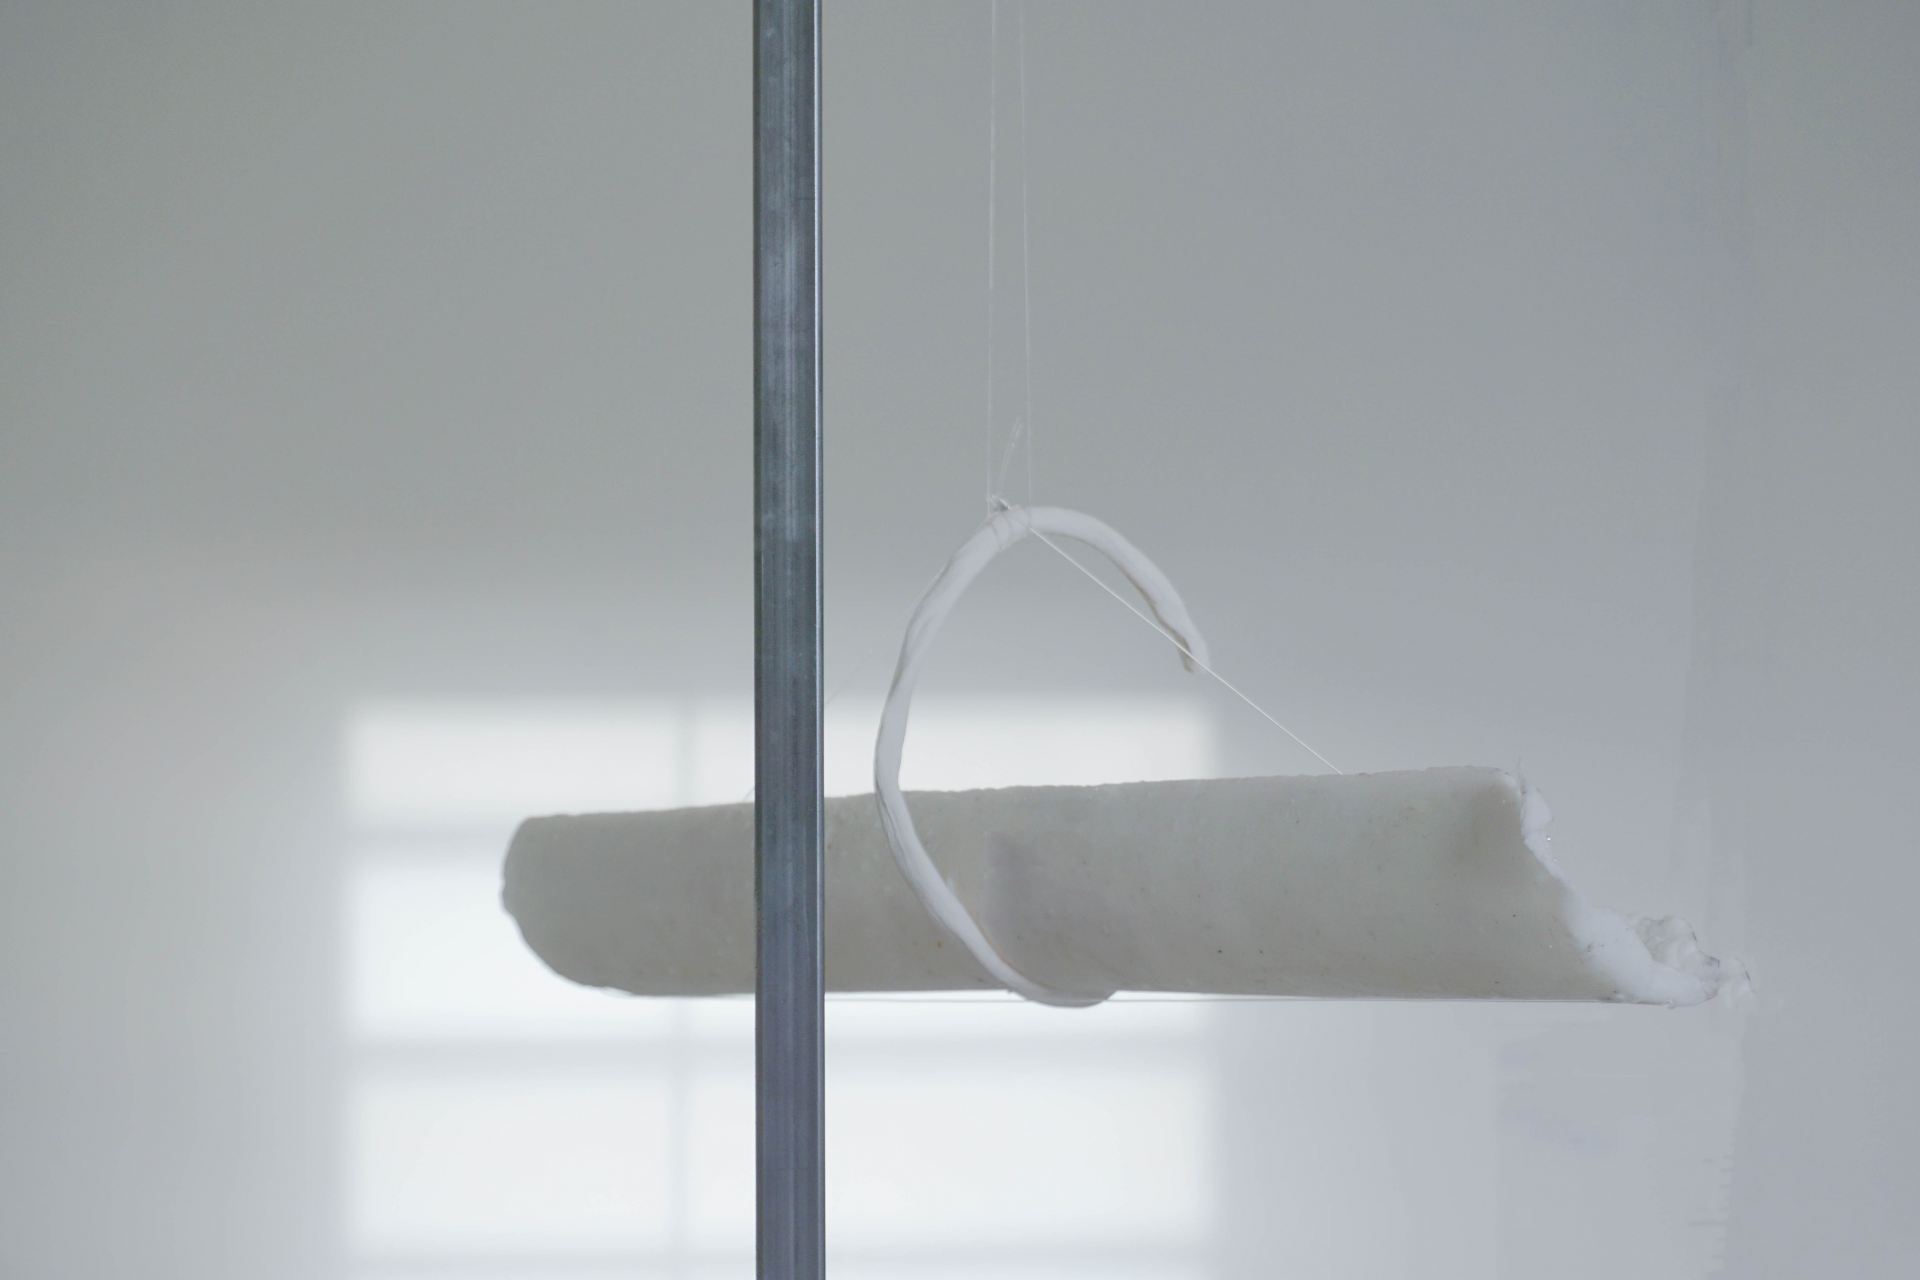 A detail shot of a sculptural water feature made using wax tubes standing in a white room.